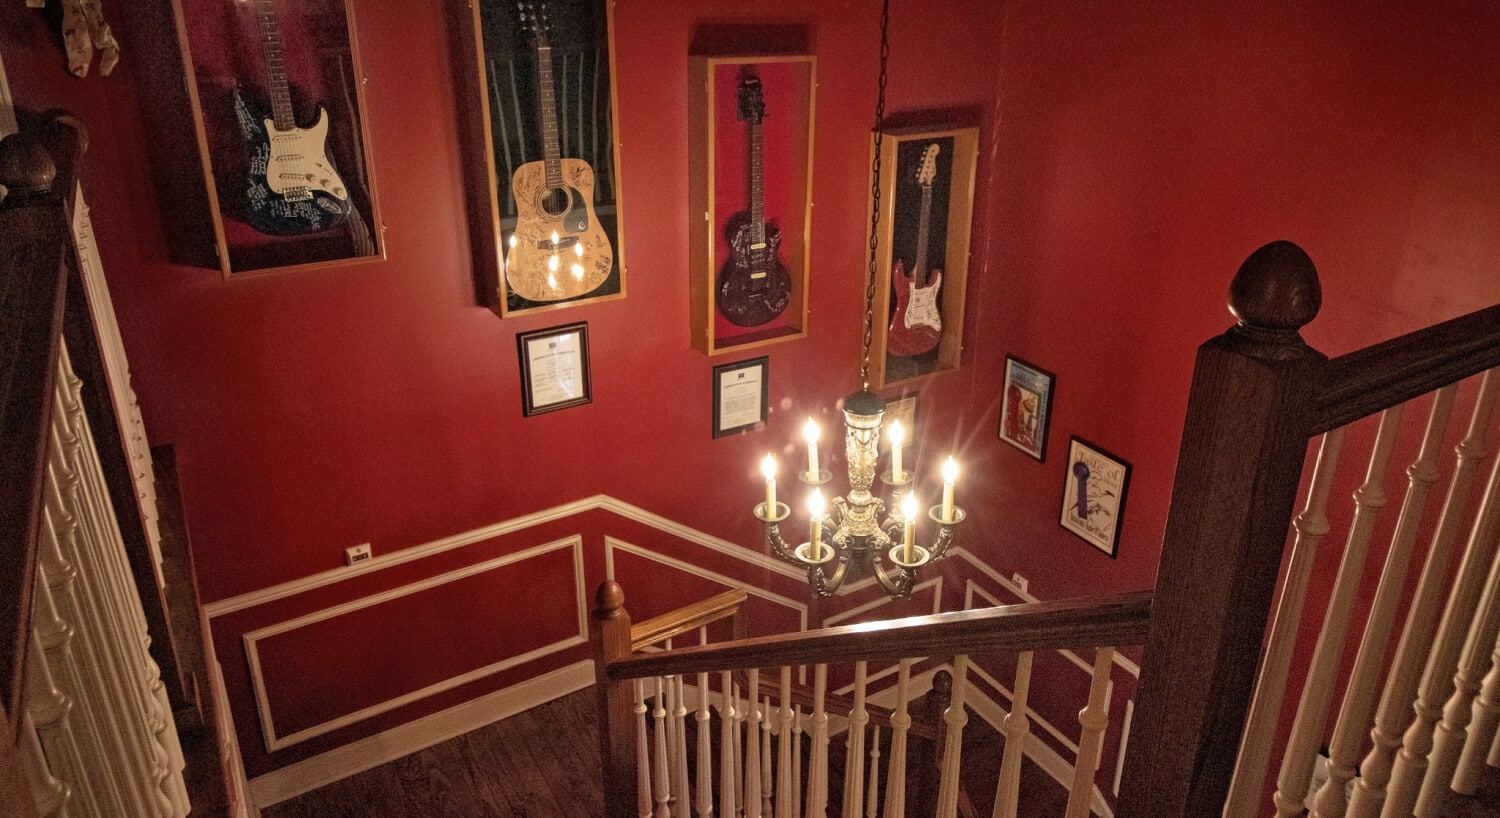 Dark wooden staircase with burgundy walls and vanilla trim and four wooden display cases with signed guitars hanging on the wall